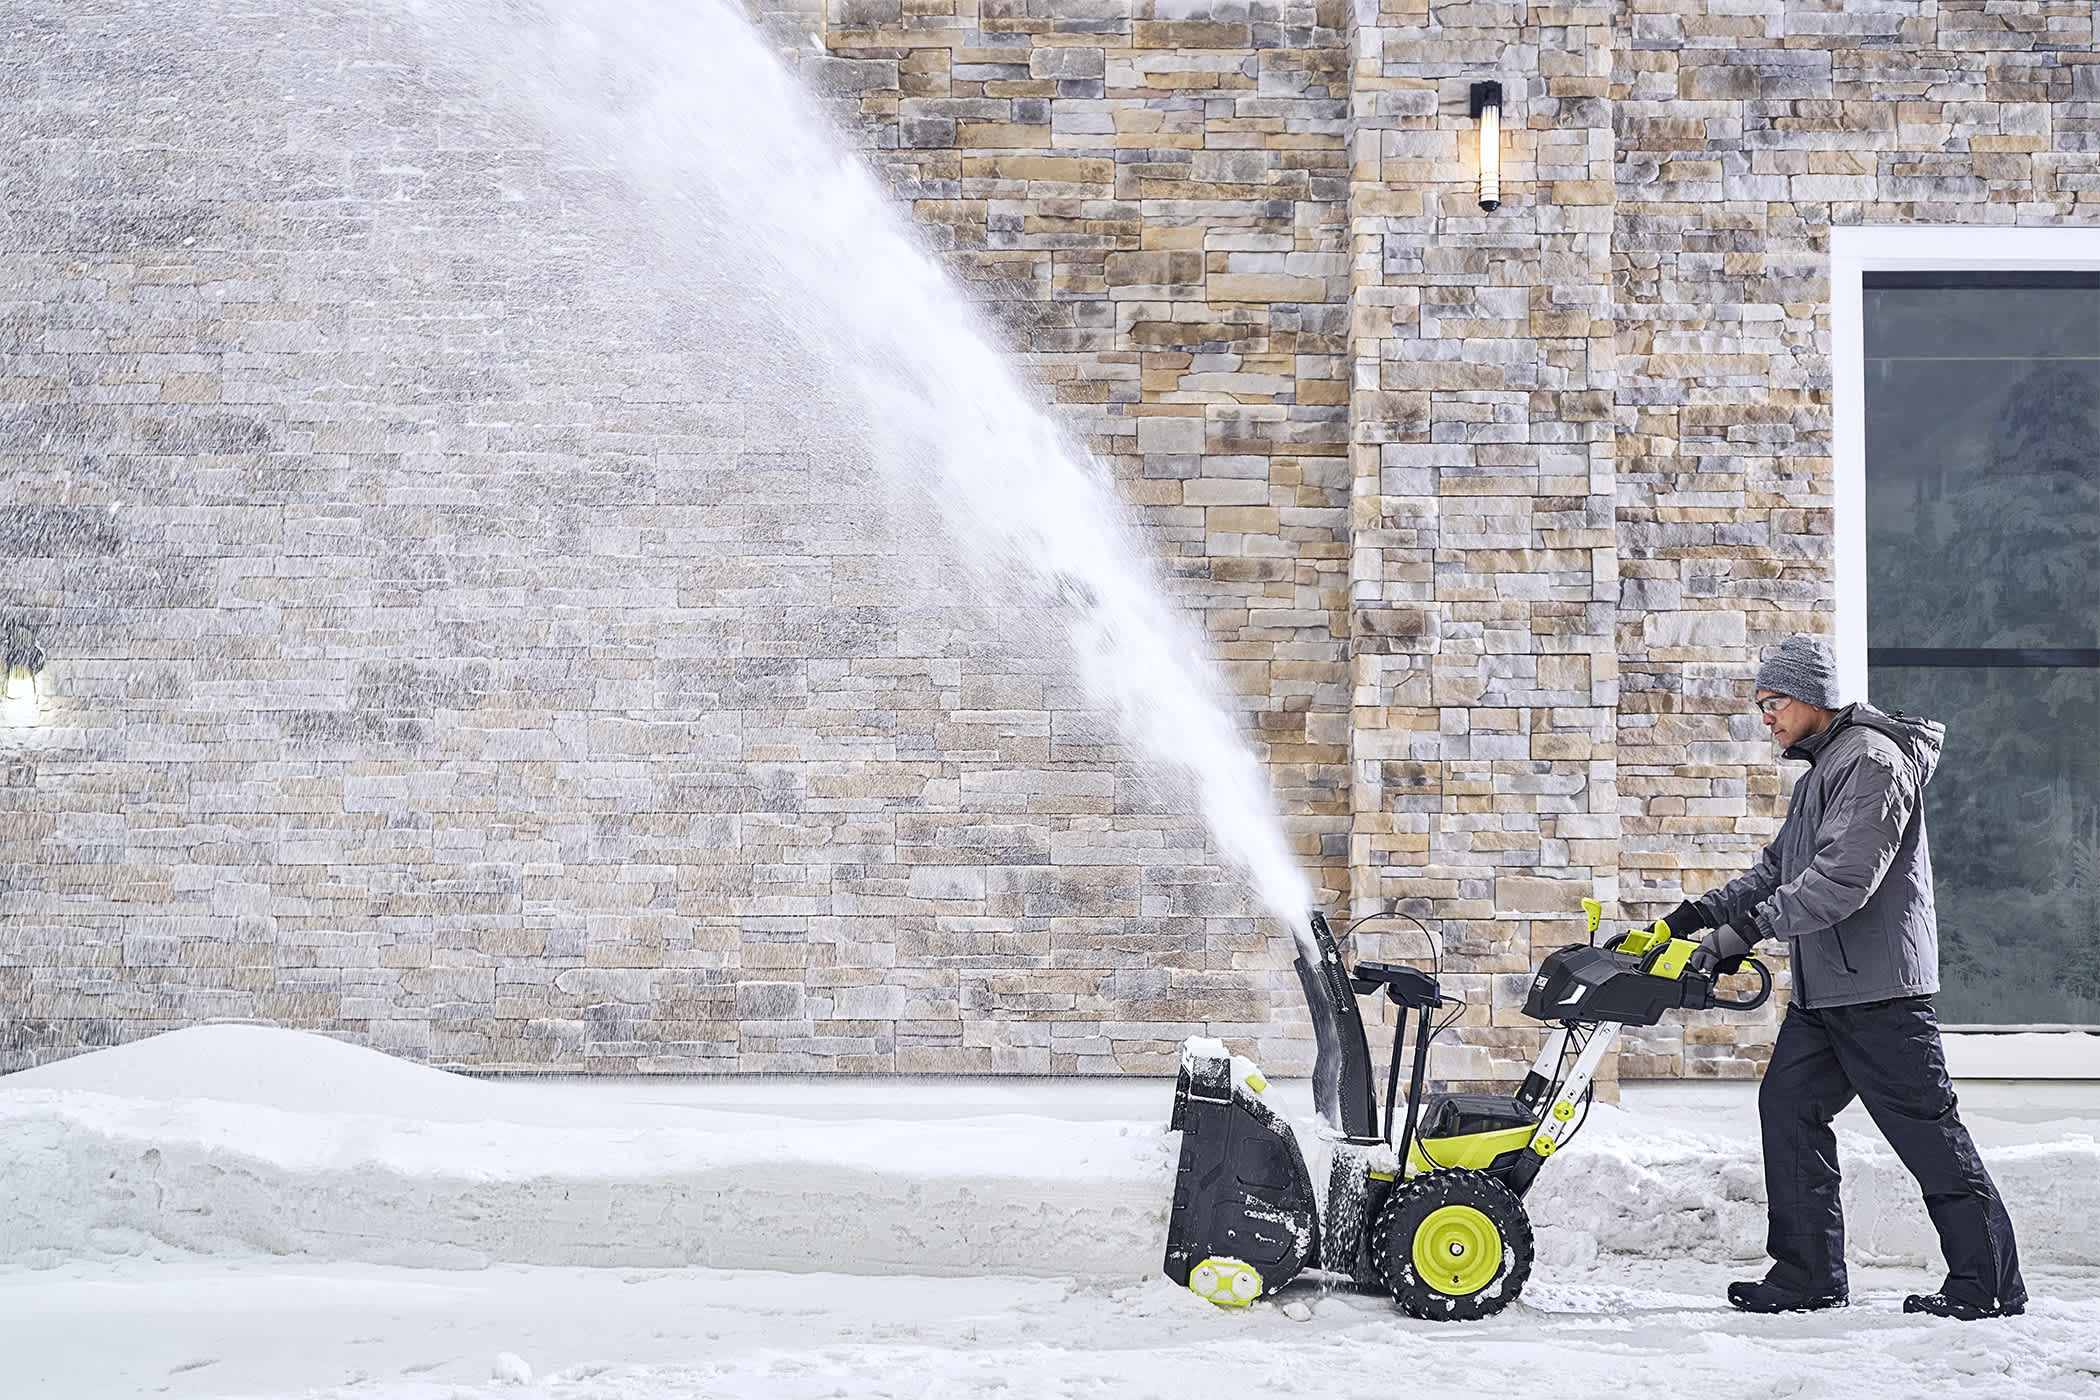 Product Features Image for Saved to List View List   RYOBI 40V HP 24-inch Brushless 2-Stage Electric Snow Blower with (4) 6.0 Ah Batteries and Rapid Charger.